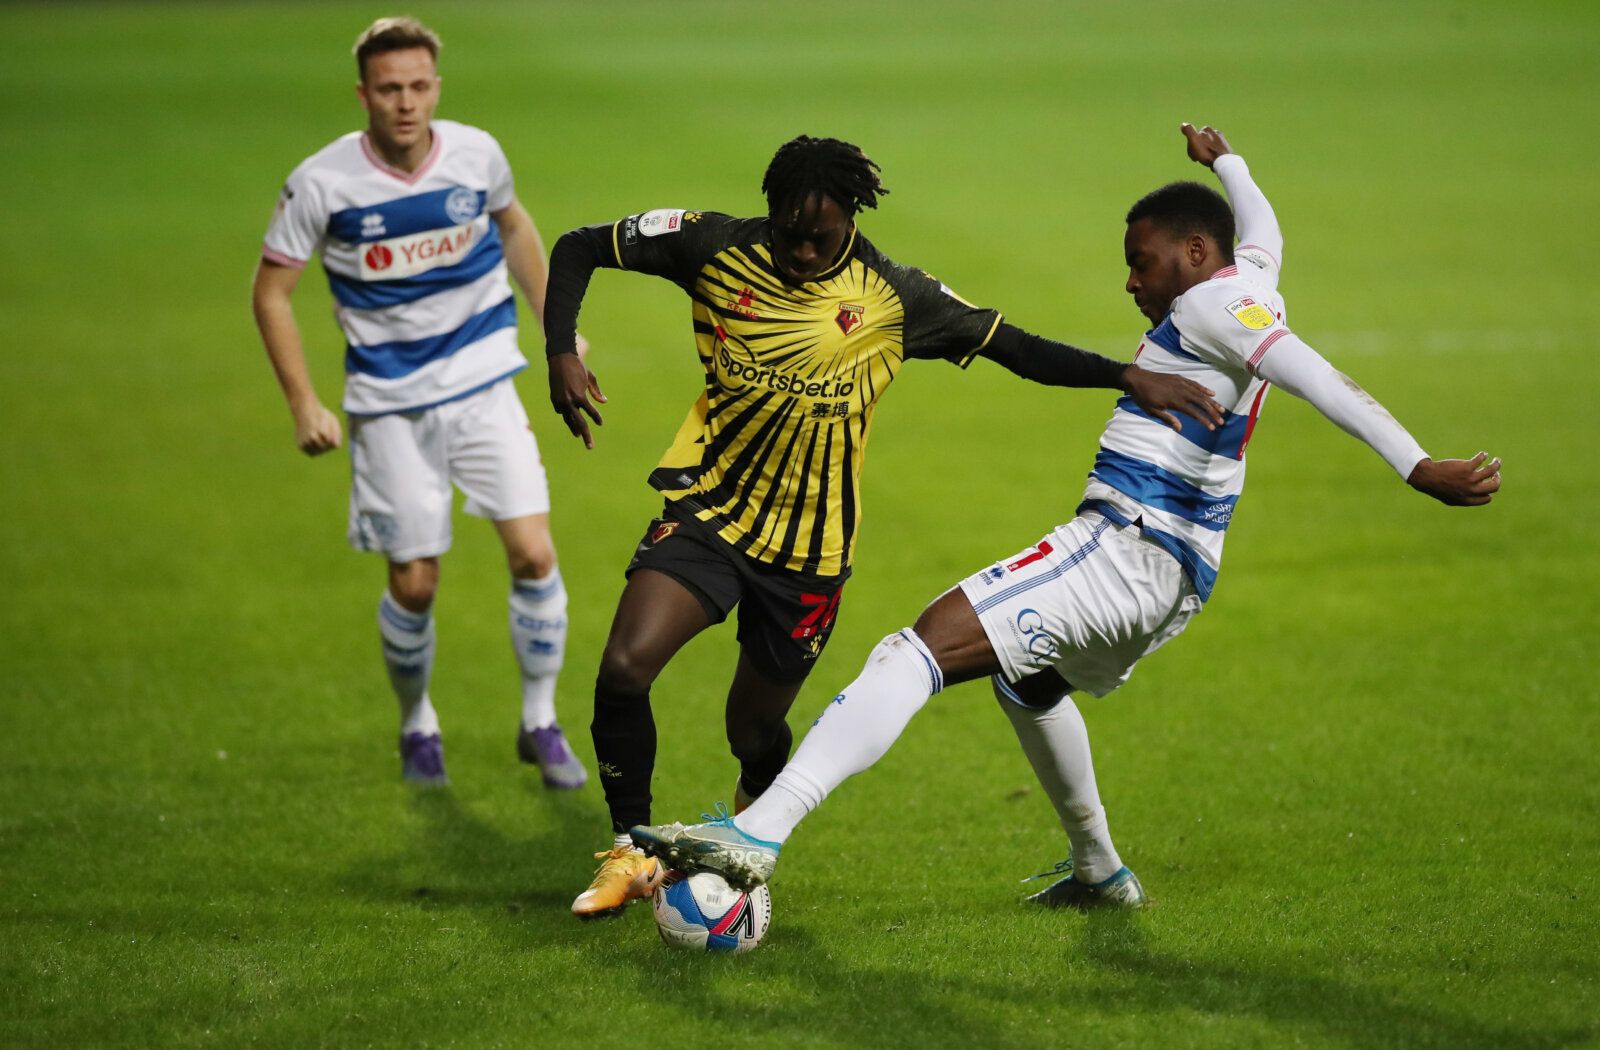 Soccer Football - Championship - Queens Park Rangers v Watford - Loftus Road, London, Britain - November 21, 2020 QPR's Bright Samuel in action with Watford's Domingos Quina Action Images/Peter Cziborra EDITORIAL USE ONLY. No use with unauthorized audio, video, data, fixture lists, club/league logos or 'live' services. Online in-match use limited to 75 images, no video emulation. No use in betting, games or single club /league/player publications.  Please contact your account representative for 